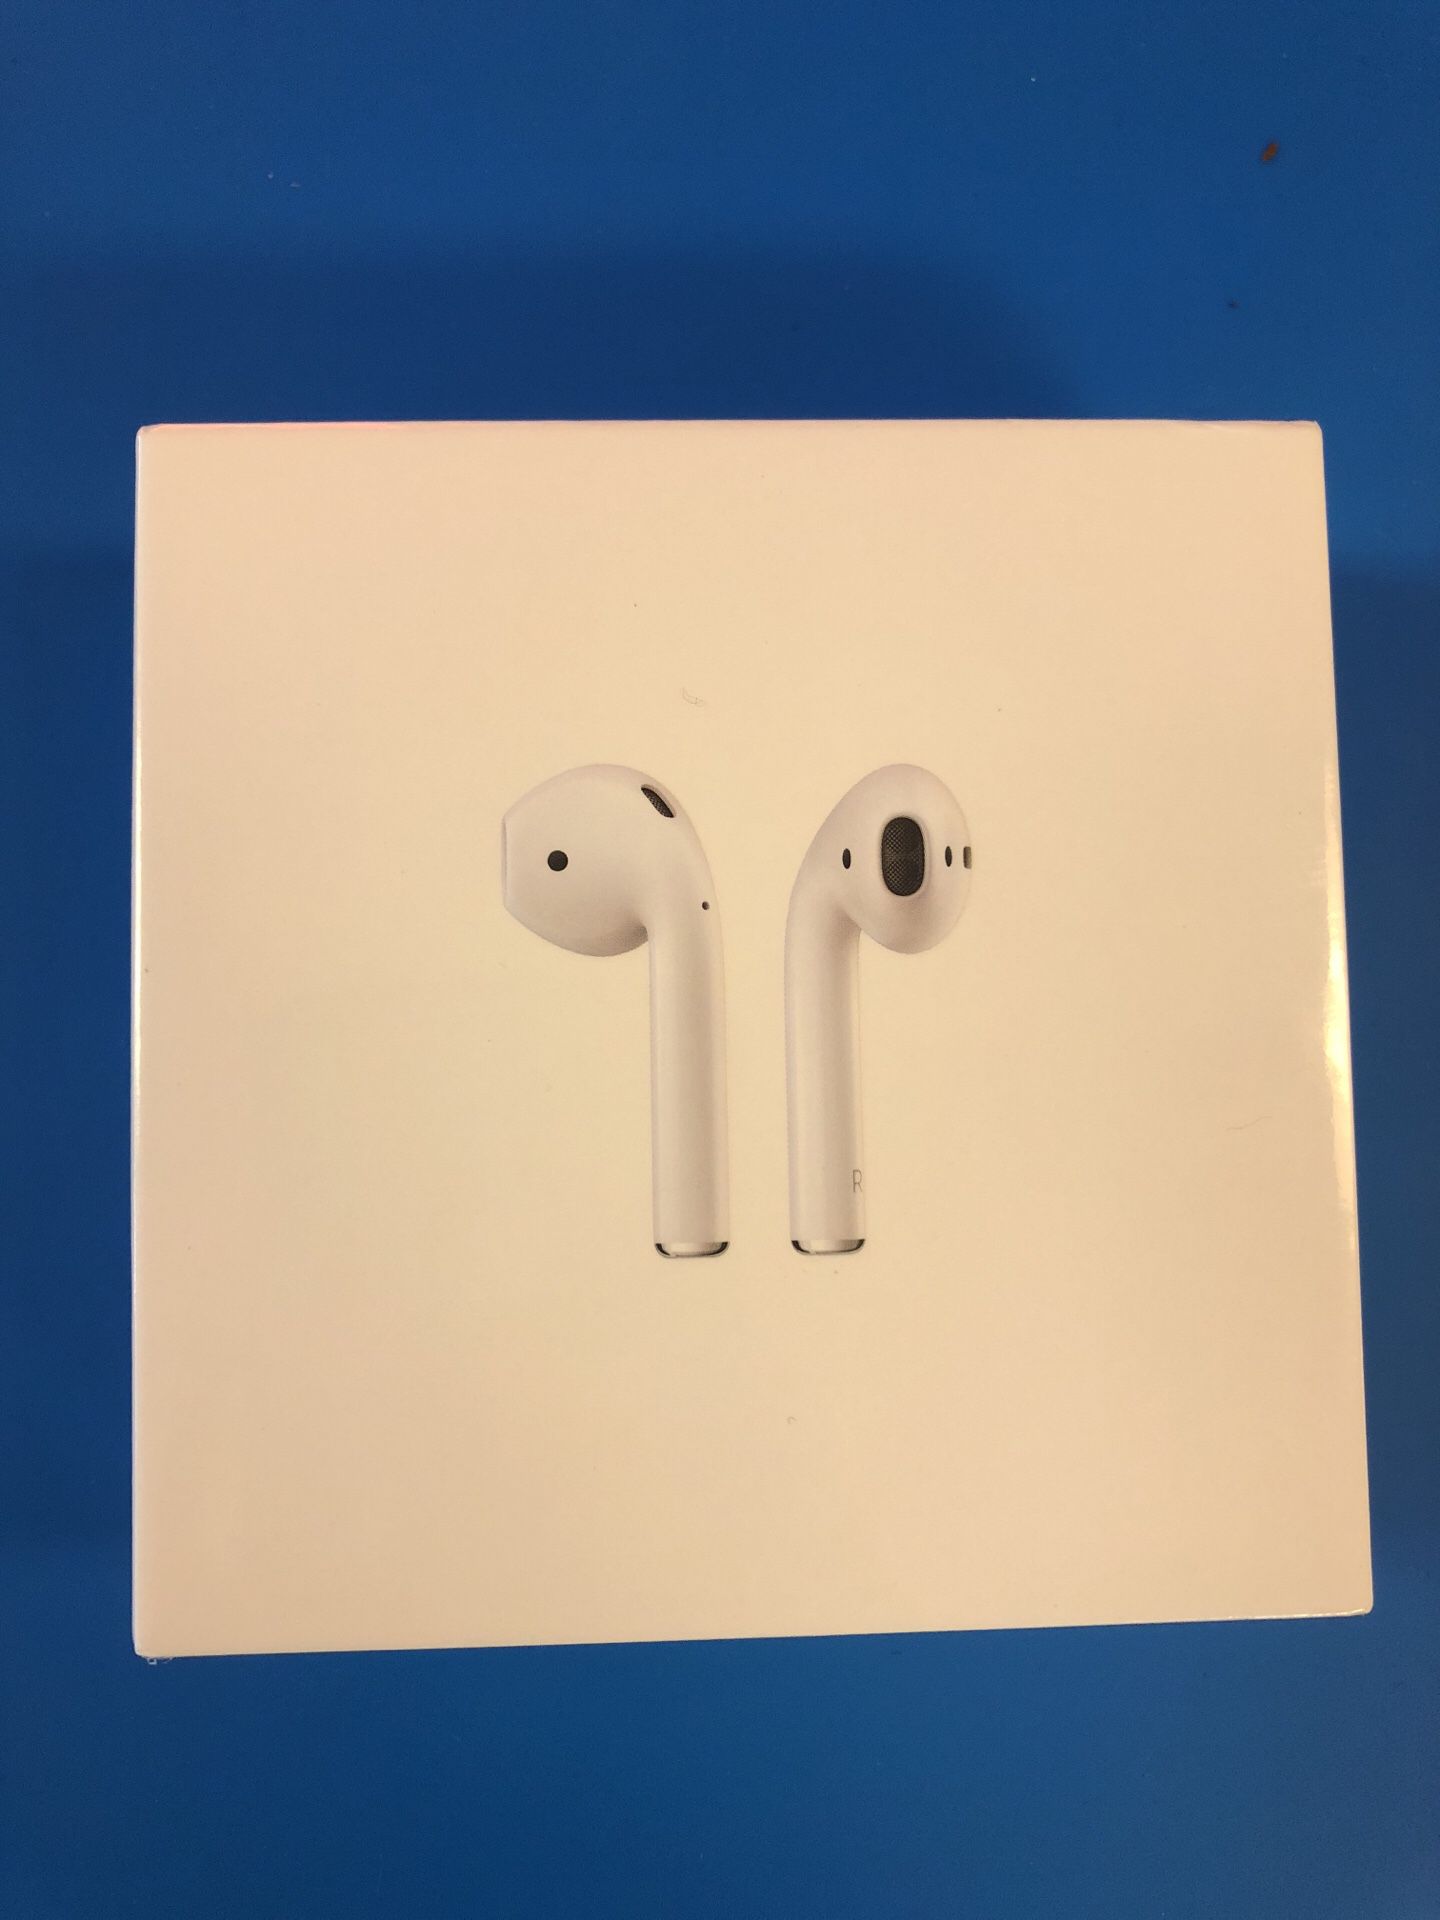 Apple AirPods Never used/opened